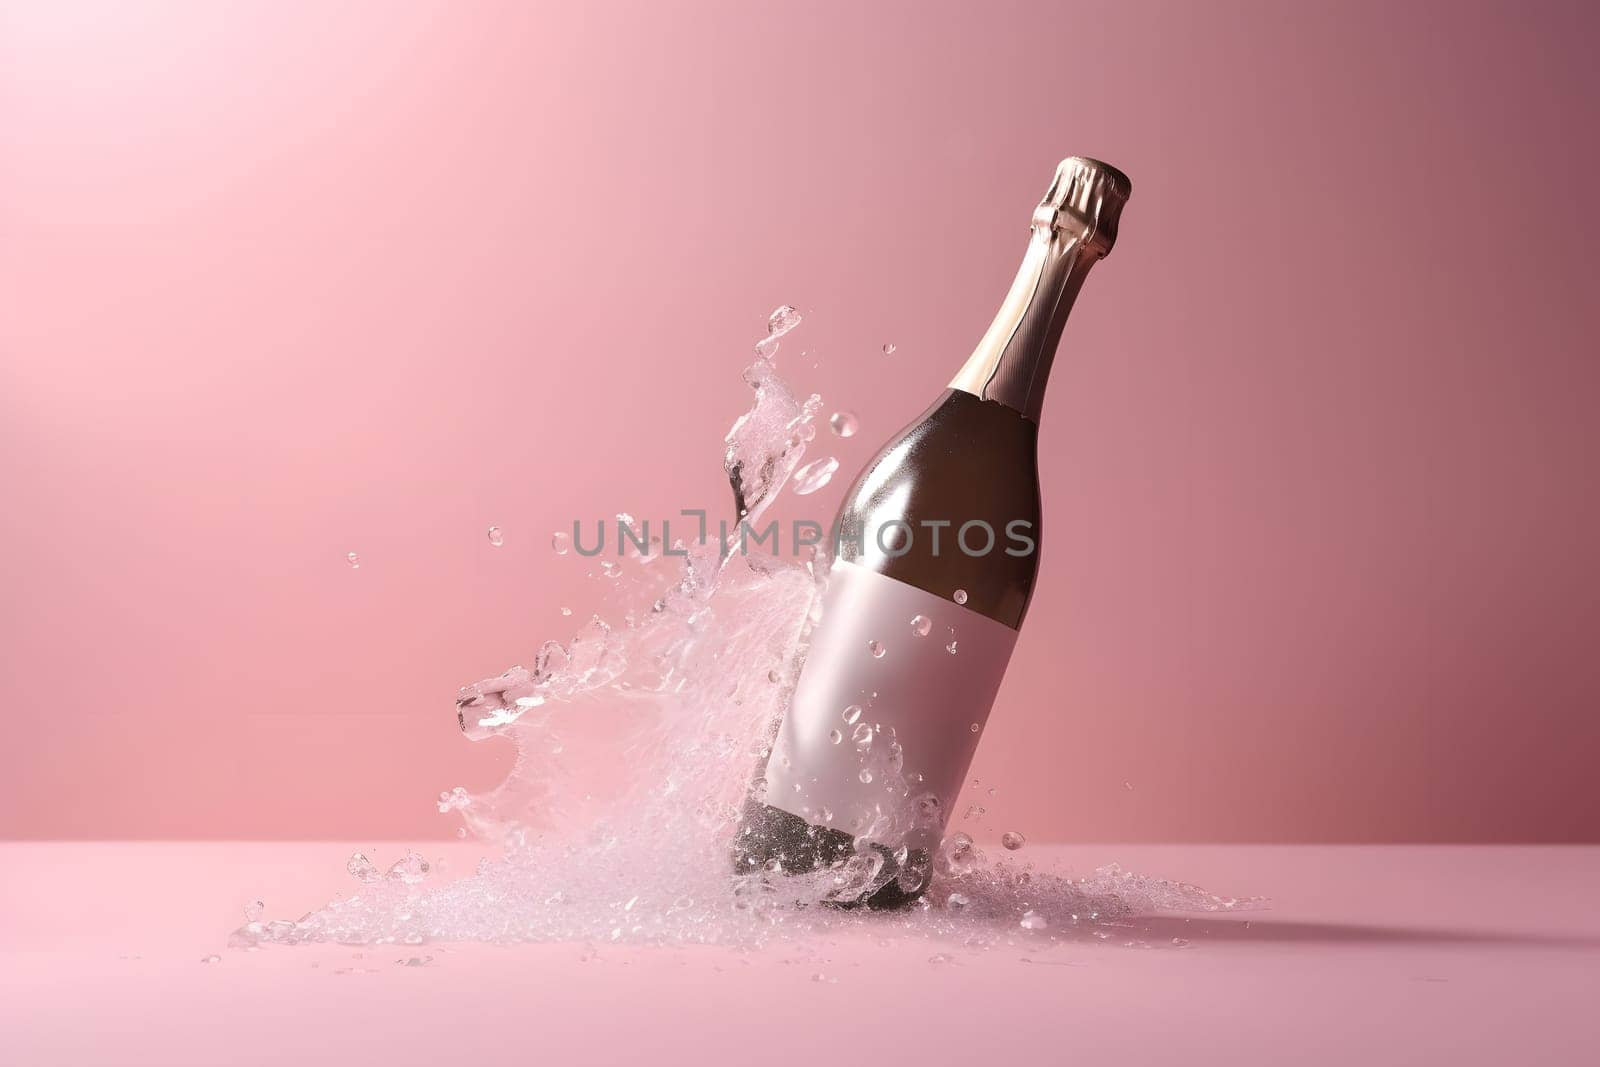 unopened bottle of champagne with splashes on pink background, neural network generated photorealistic image by z1b